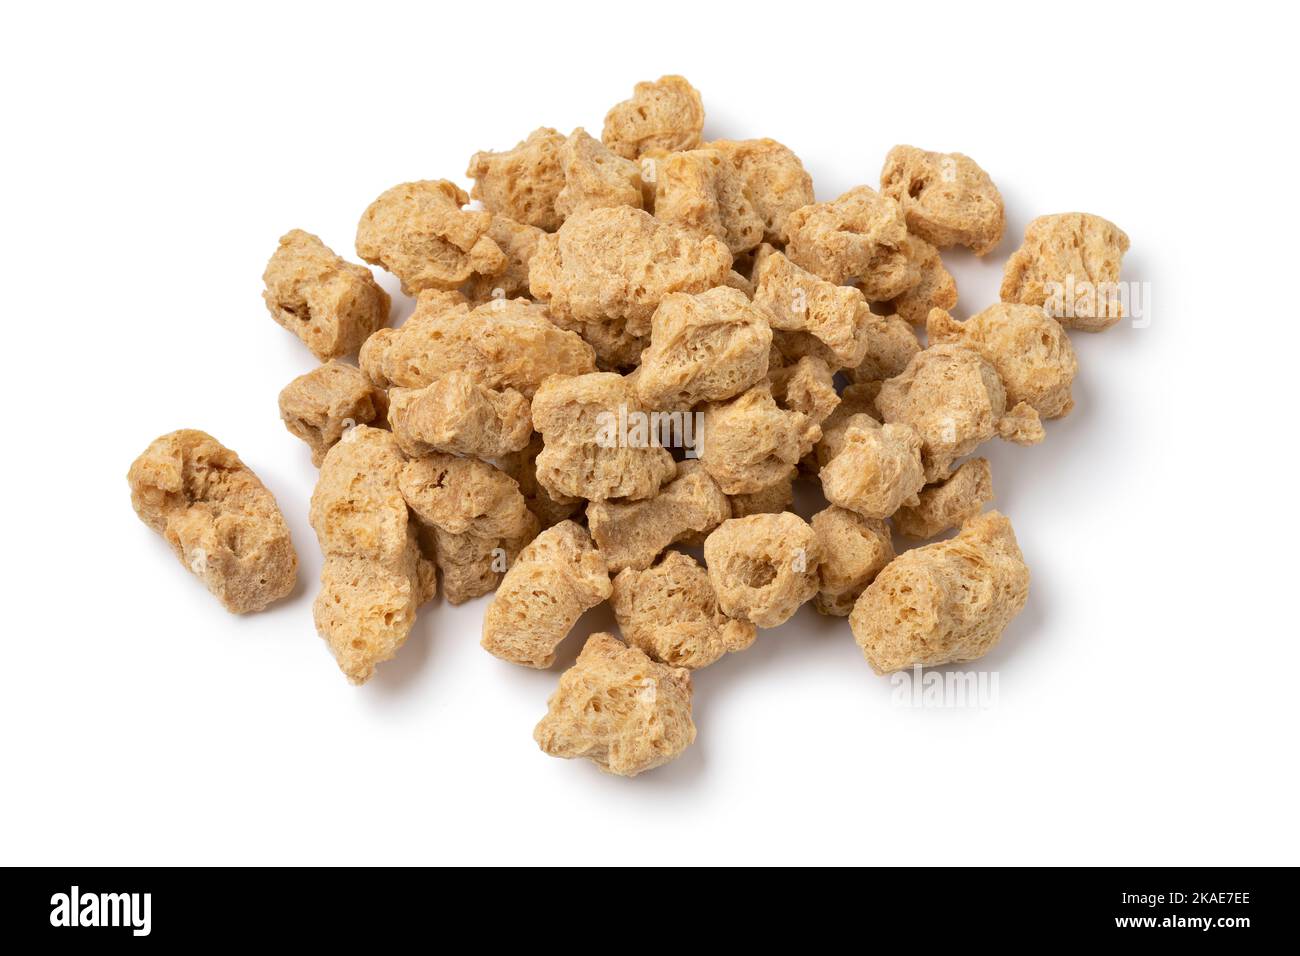 Heap of dried soya chunks close up isolated on white background Stock Photo